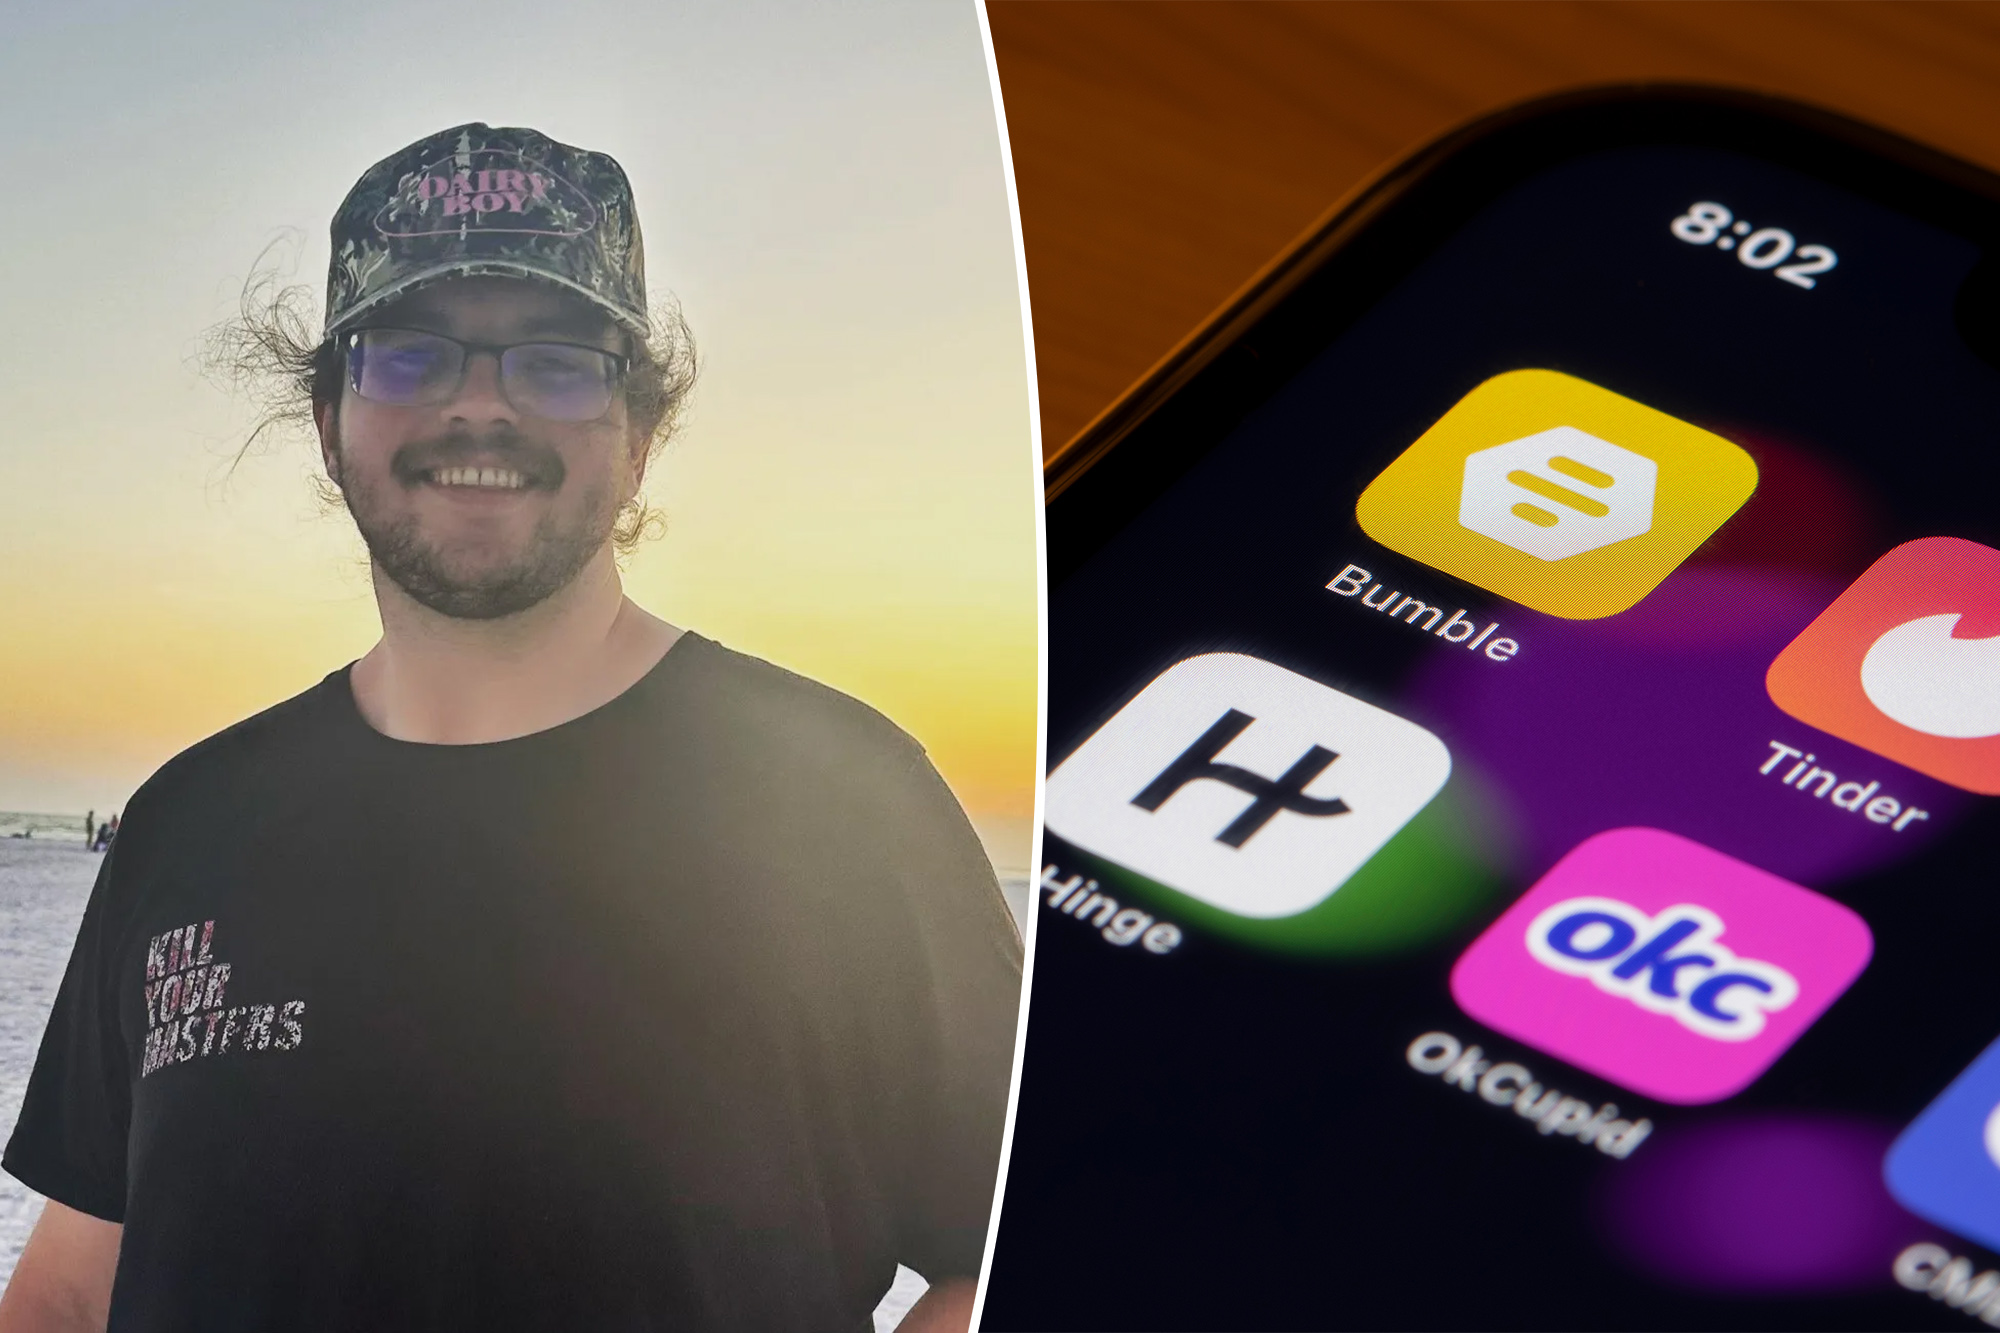 Ed Turner, 27, had no intention of actually using the dating app to meet women or get a girlfriend, saying he simply wanted members of the fairer sex to "like" his profile for validation.